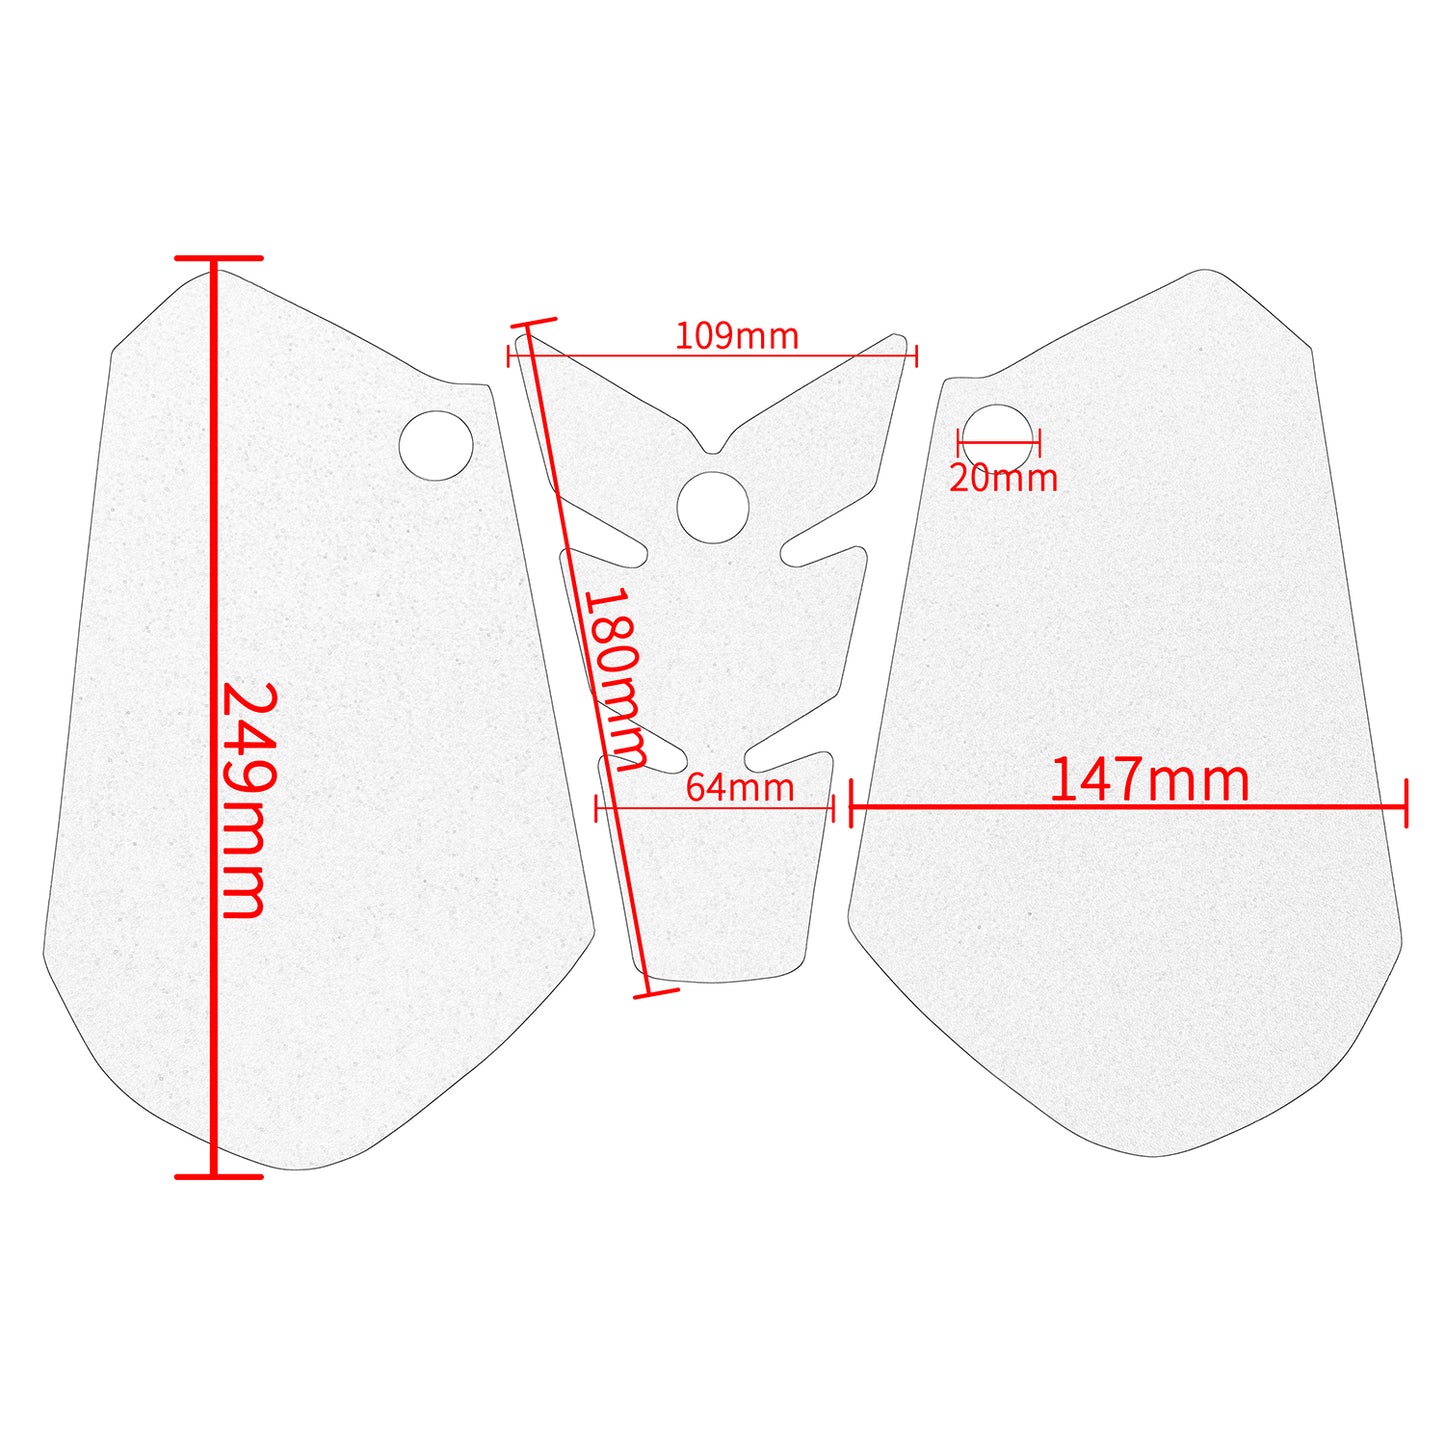 Wolfline Motorcycle Accessories Anti Slip Tank Pad Stickers Side Gas Tank Pad Knee Grip Decals Protection For Honda CBR600RR CBR 600RR CBR600 RR 2013 2014 2015 2016 2017 2018